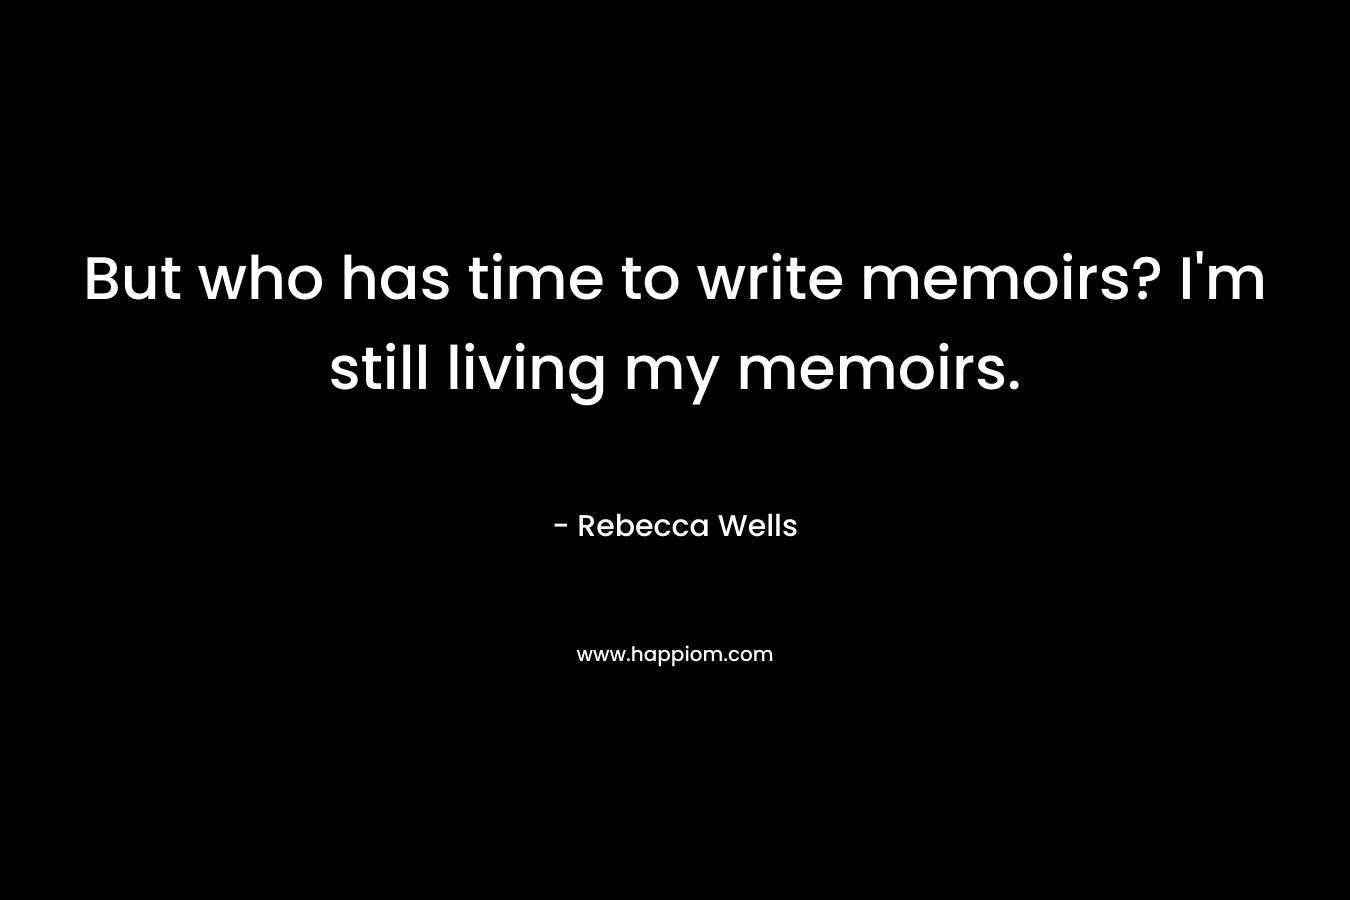 But who has time to write memoirs? I'm still living my memoirs.